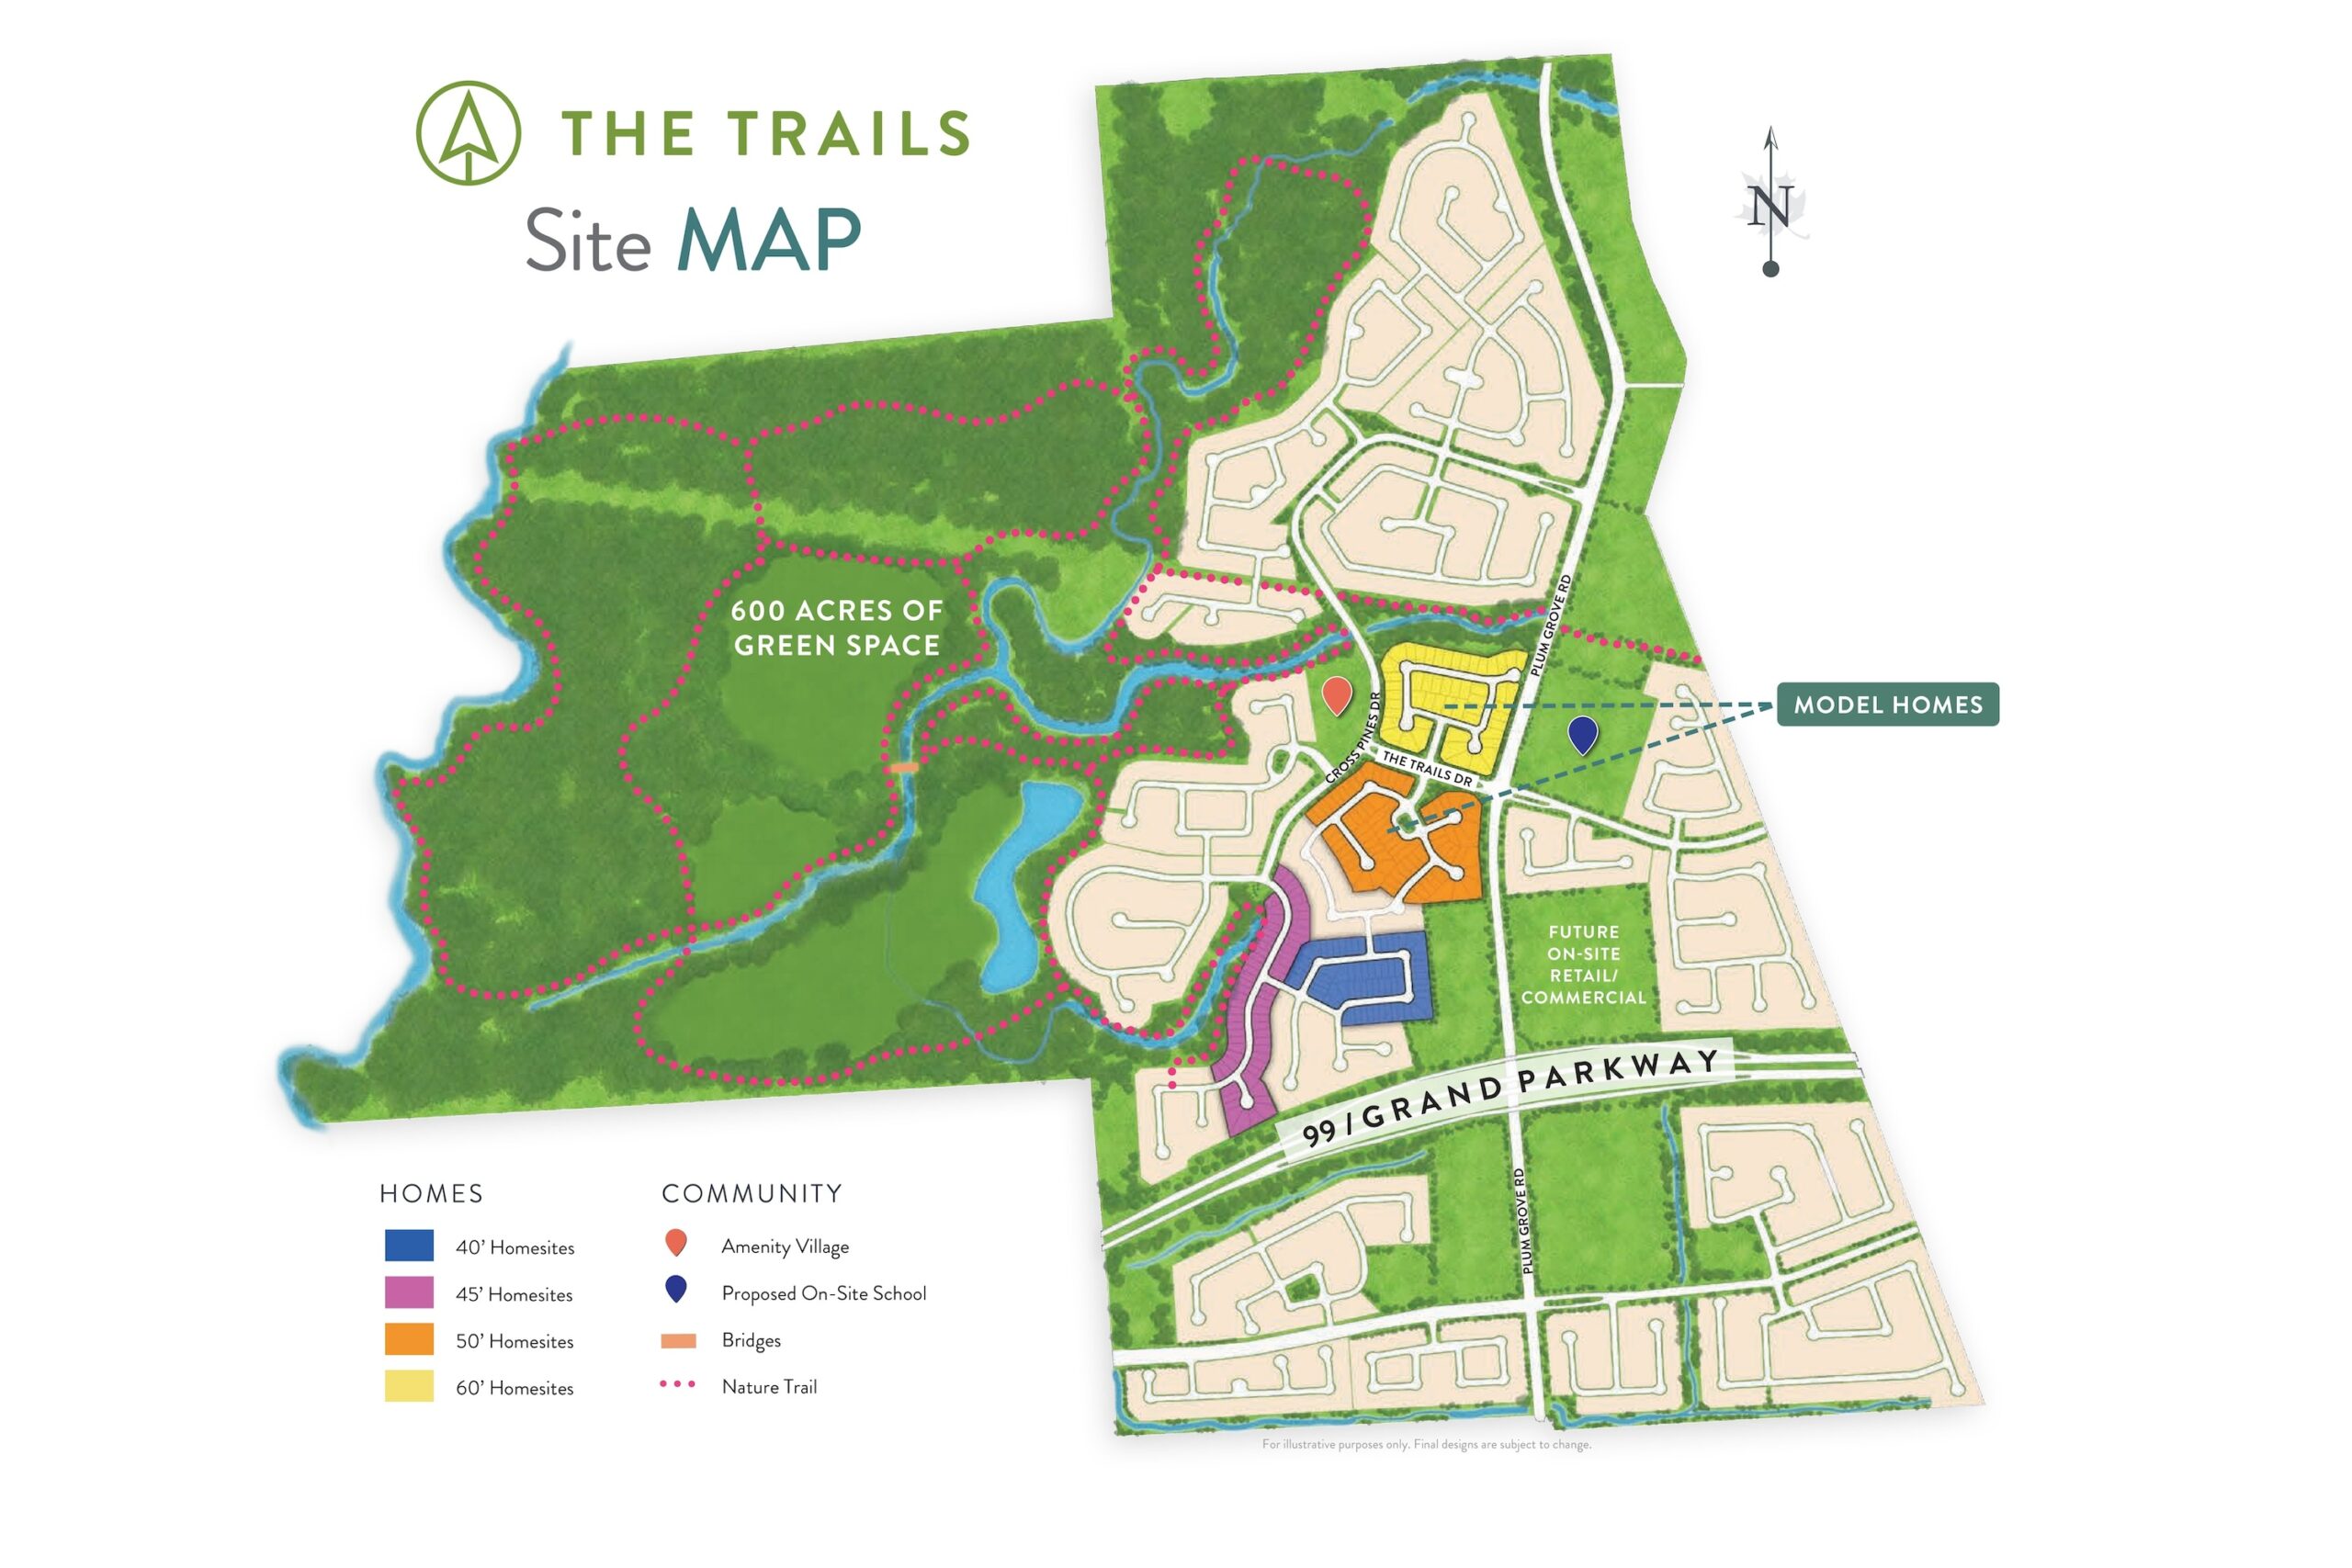 new home community site plan from upper. $200s- The Trails site plan